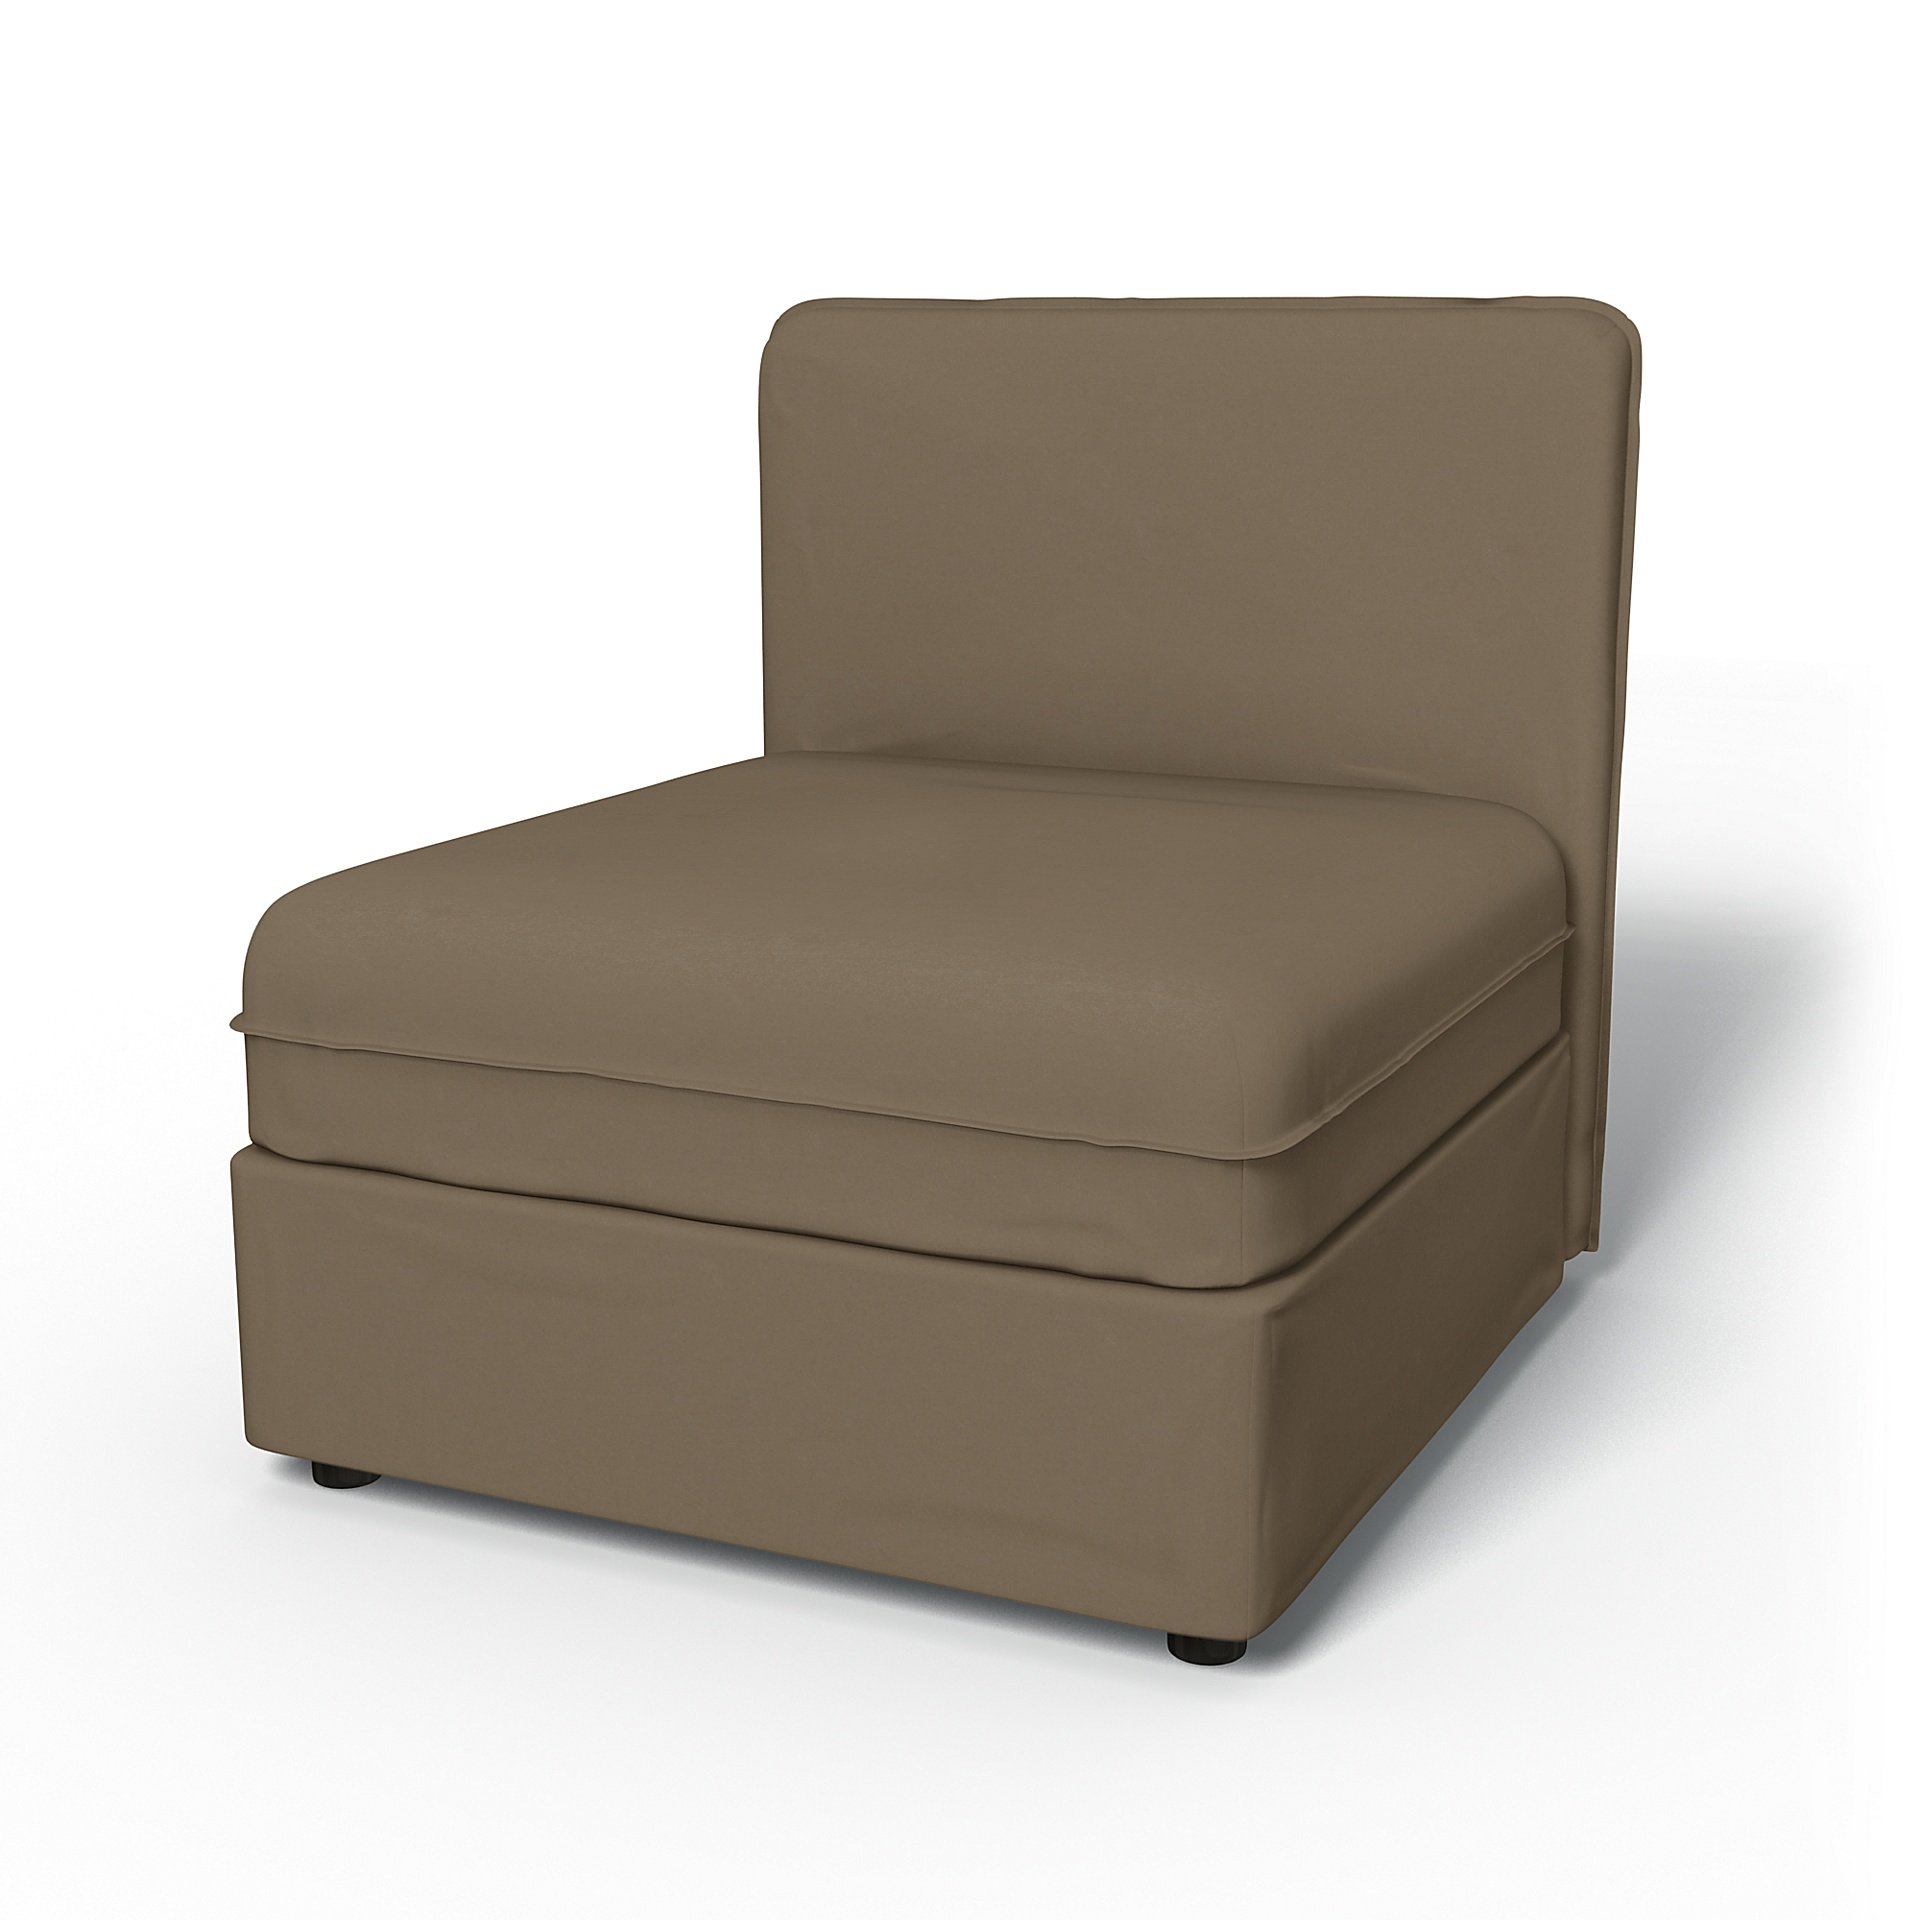 IKEA - Vallentuna Seat Module with Low Back Cover 80x80cm 32x32in, Taupe, Velvet - Bemz